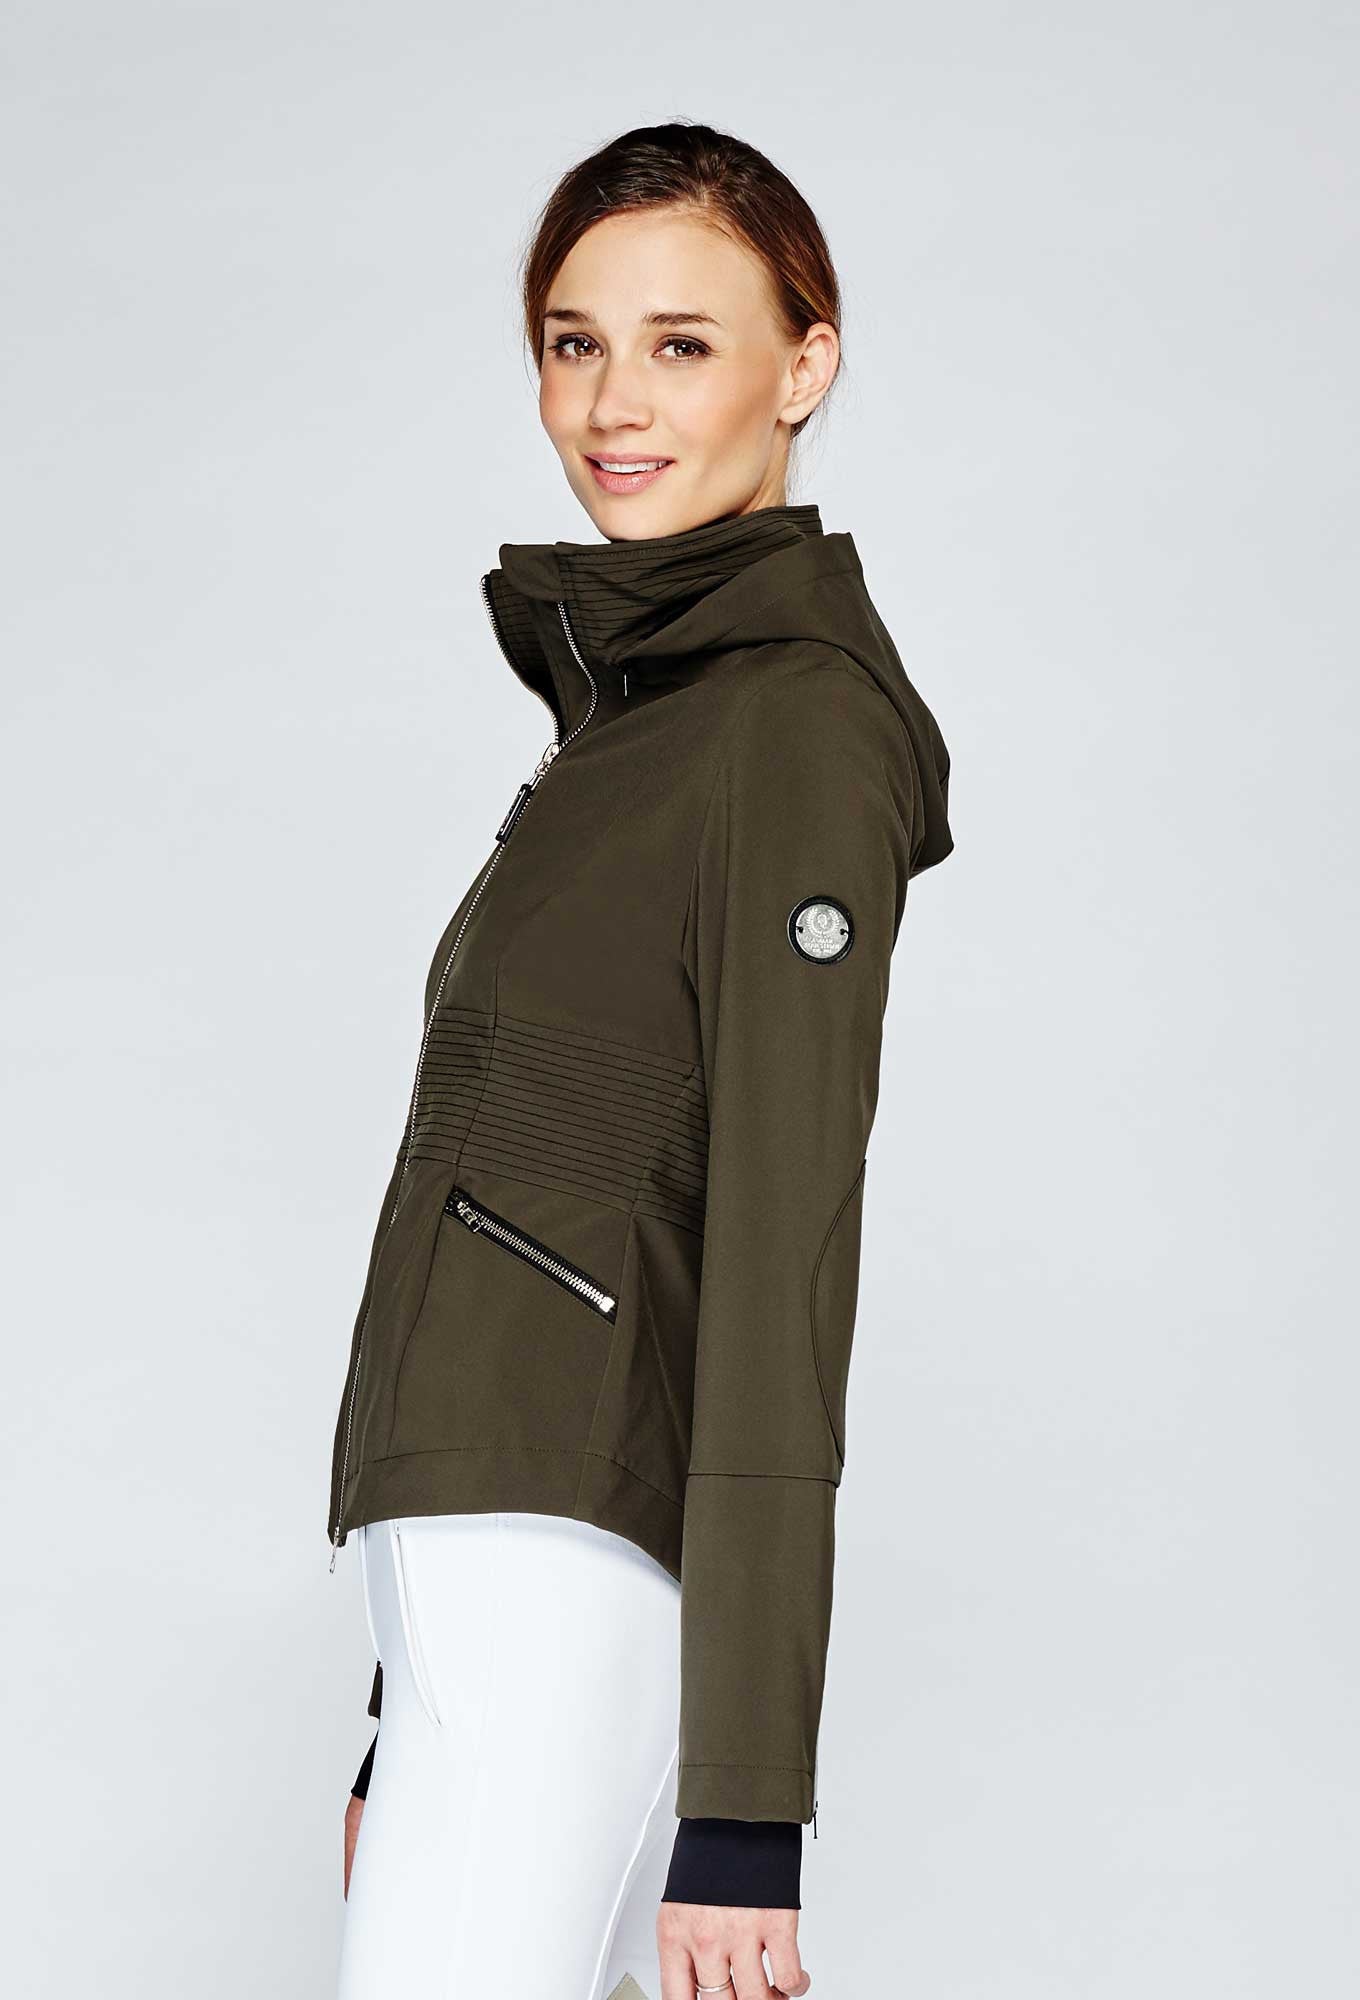 Noel Asmar Special Edition Rider Jacket - Olive - Uptown E Store